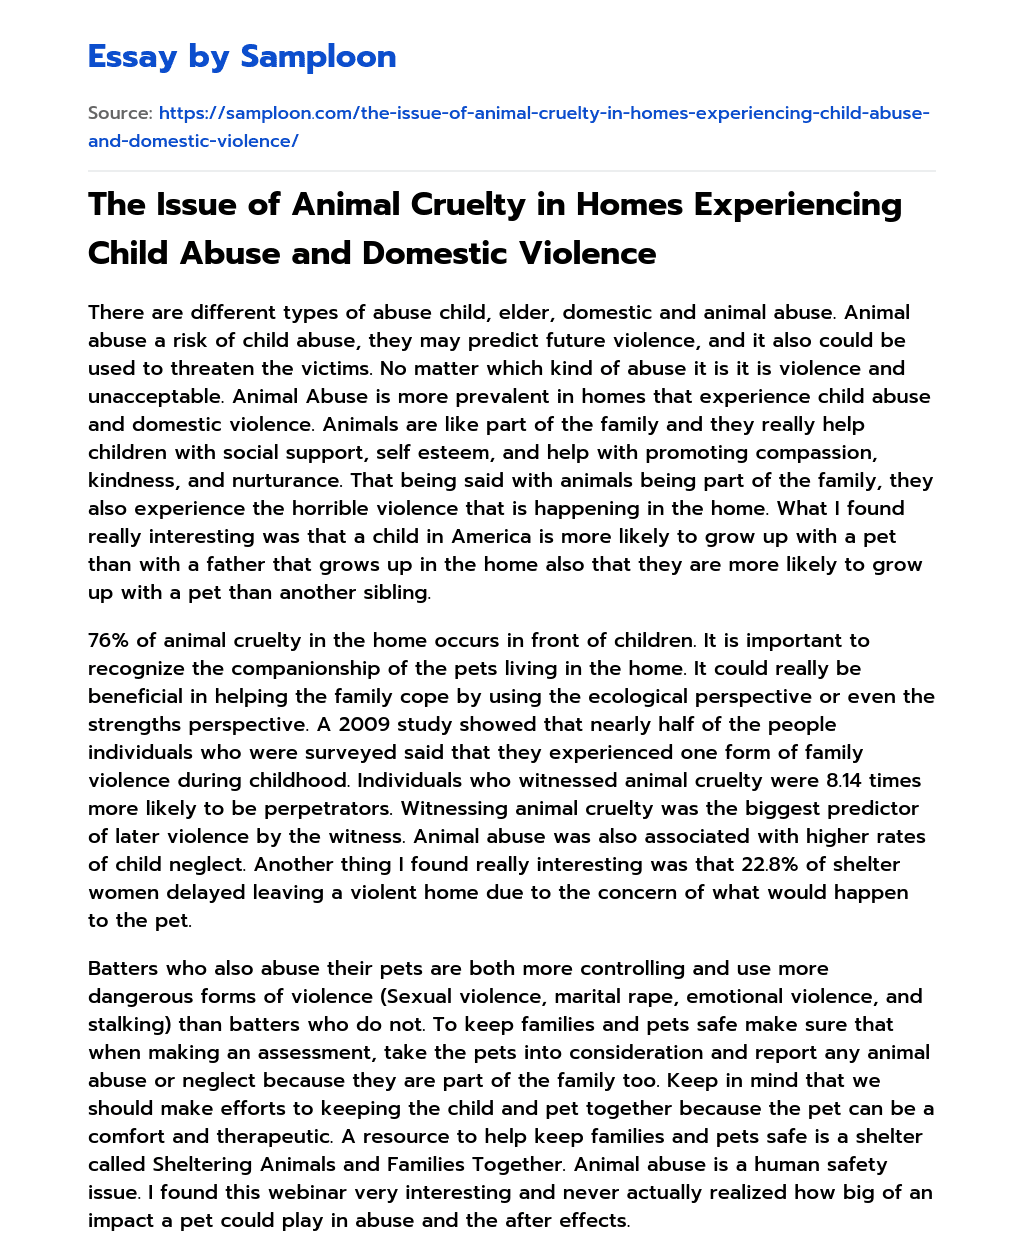 The Issue of Animal Cruelty in Homes Experiencing Child Abuse and Domestic Violence essay